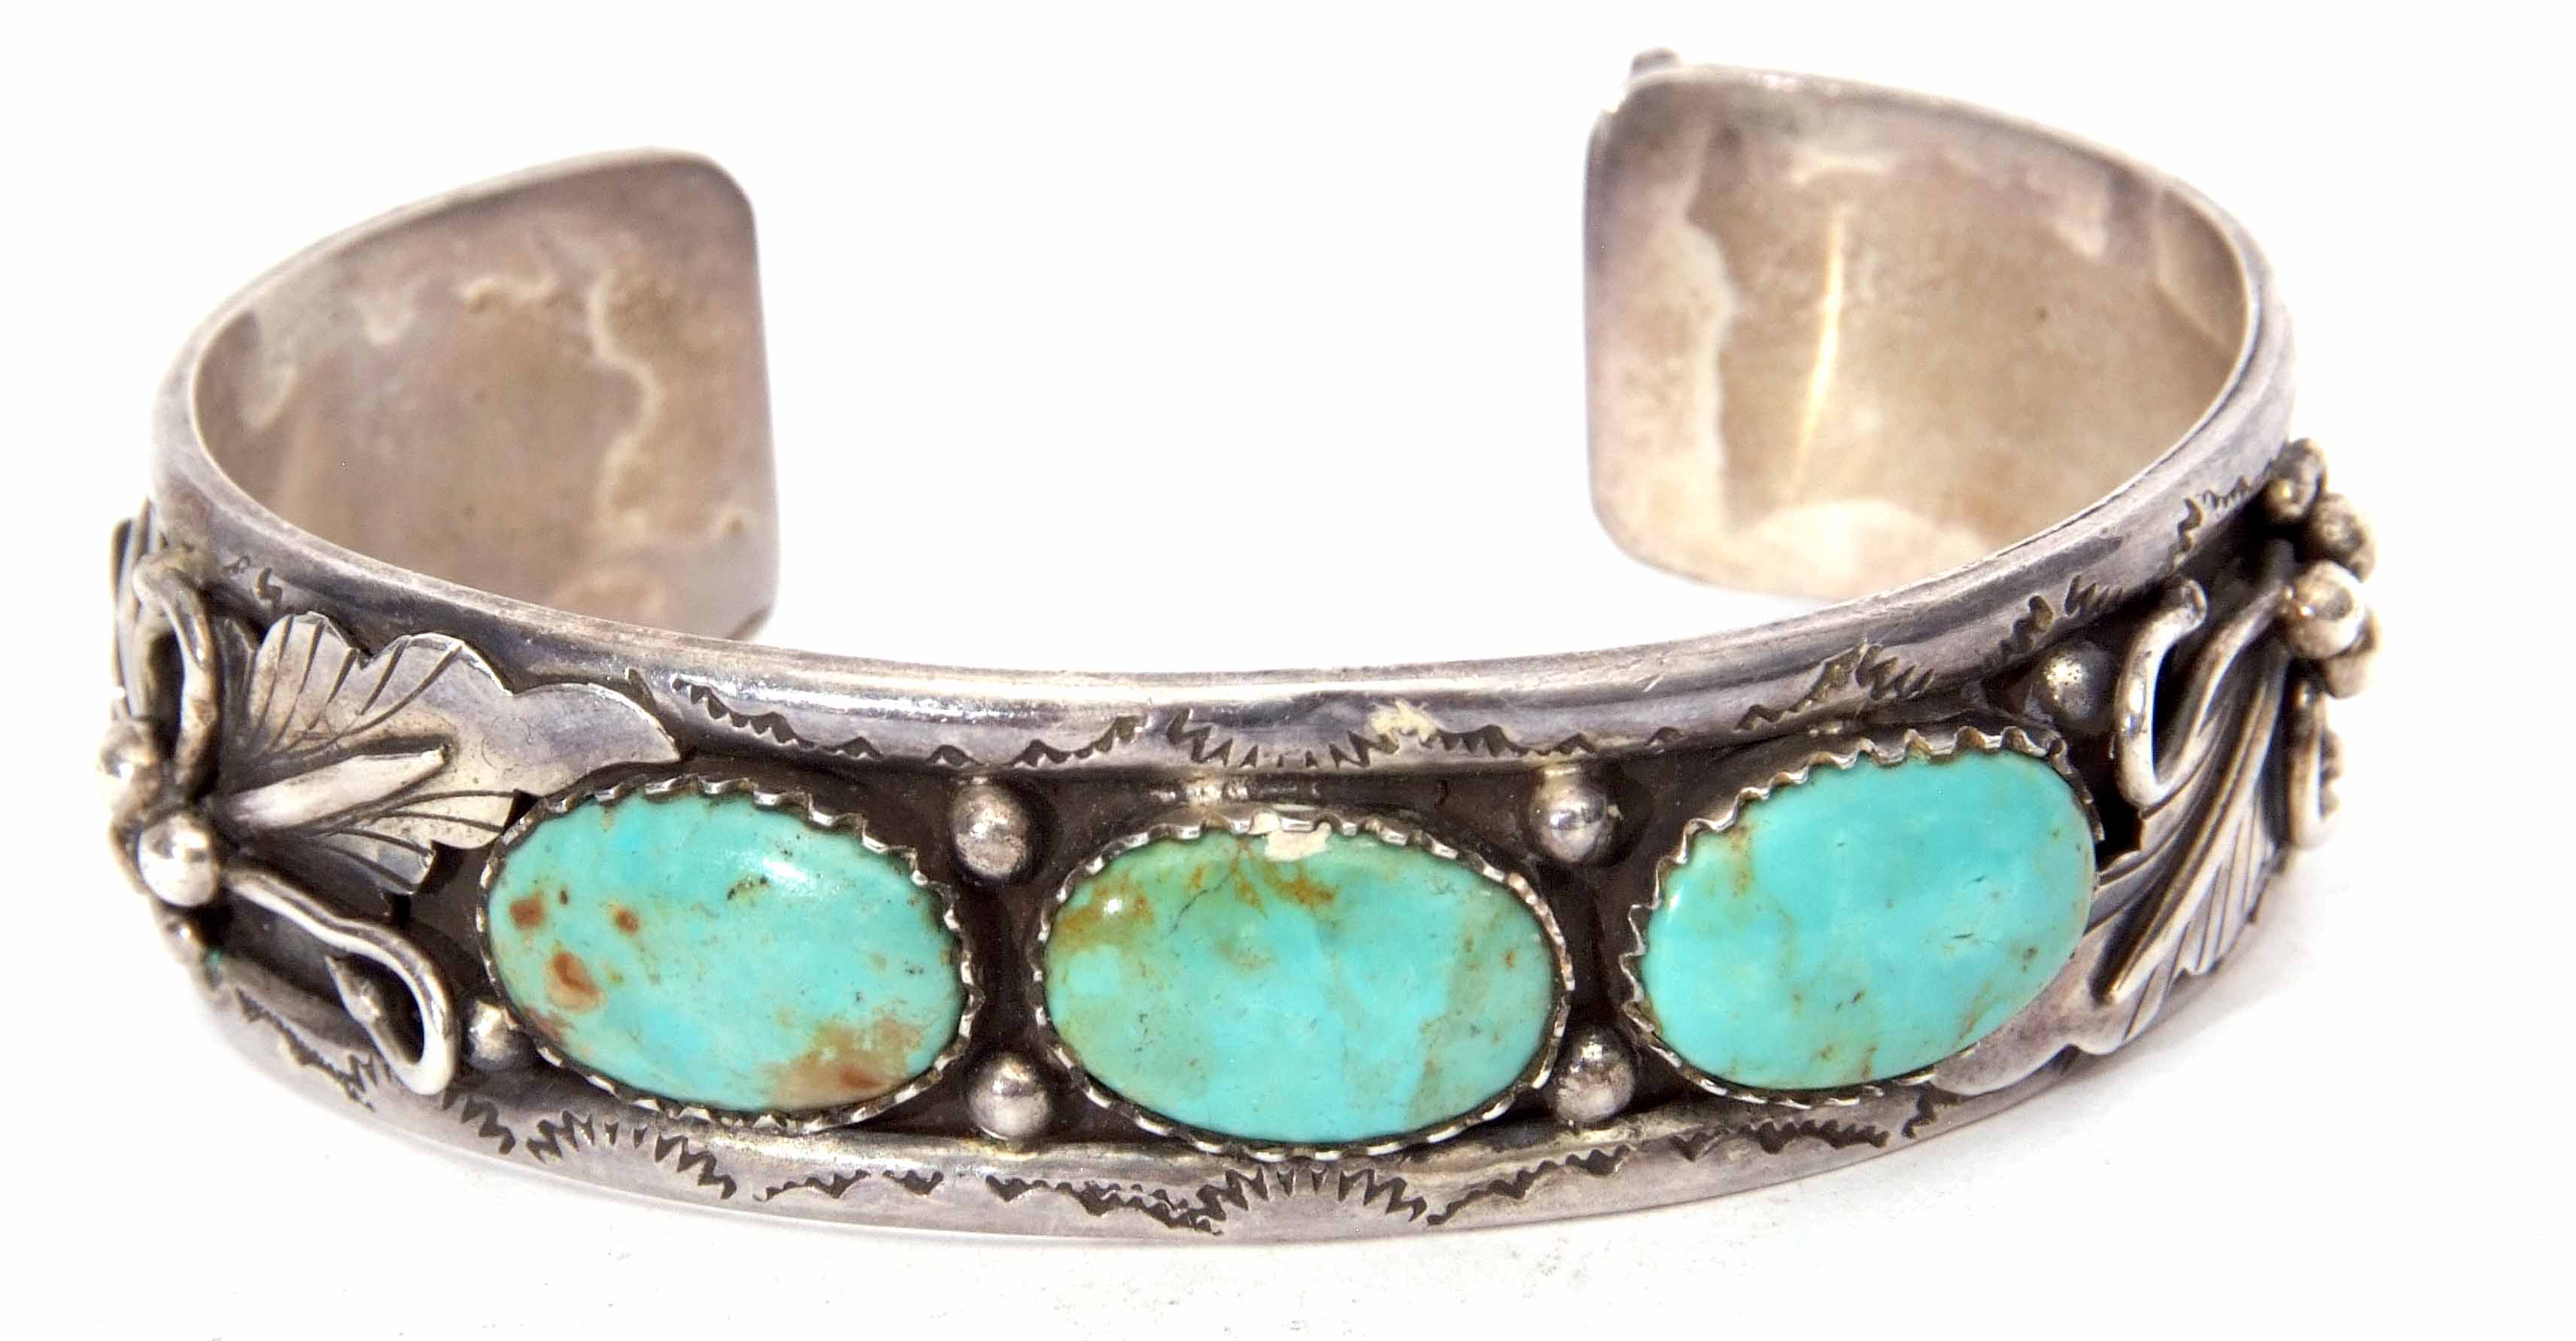 White metal and turquoise set torque bangle, an ornate leaf and bead design featuring three collet